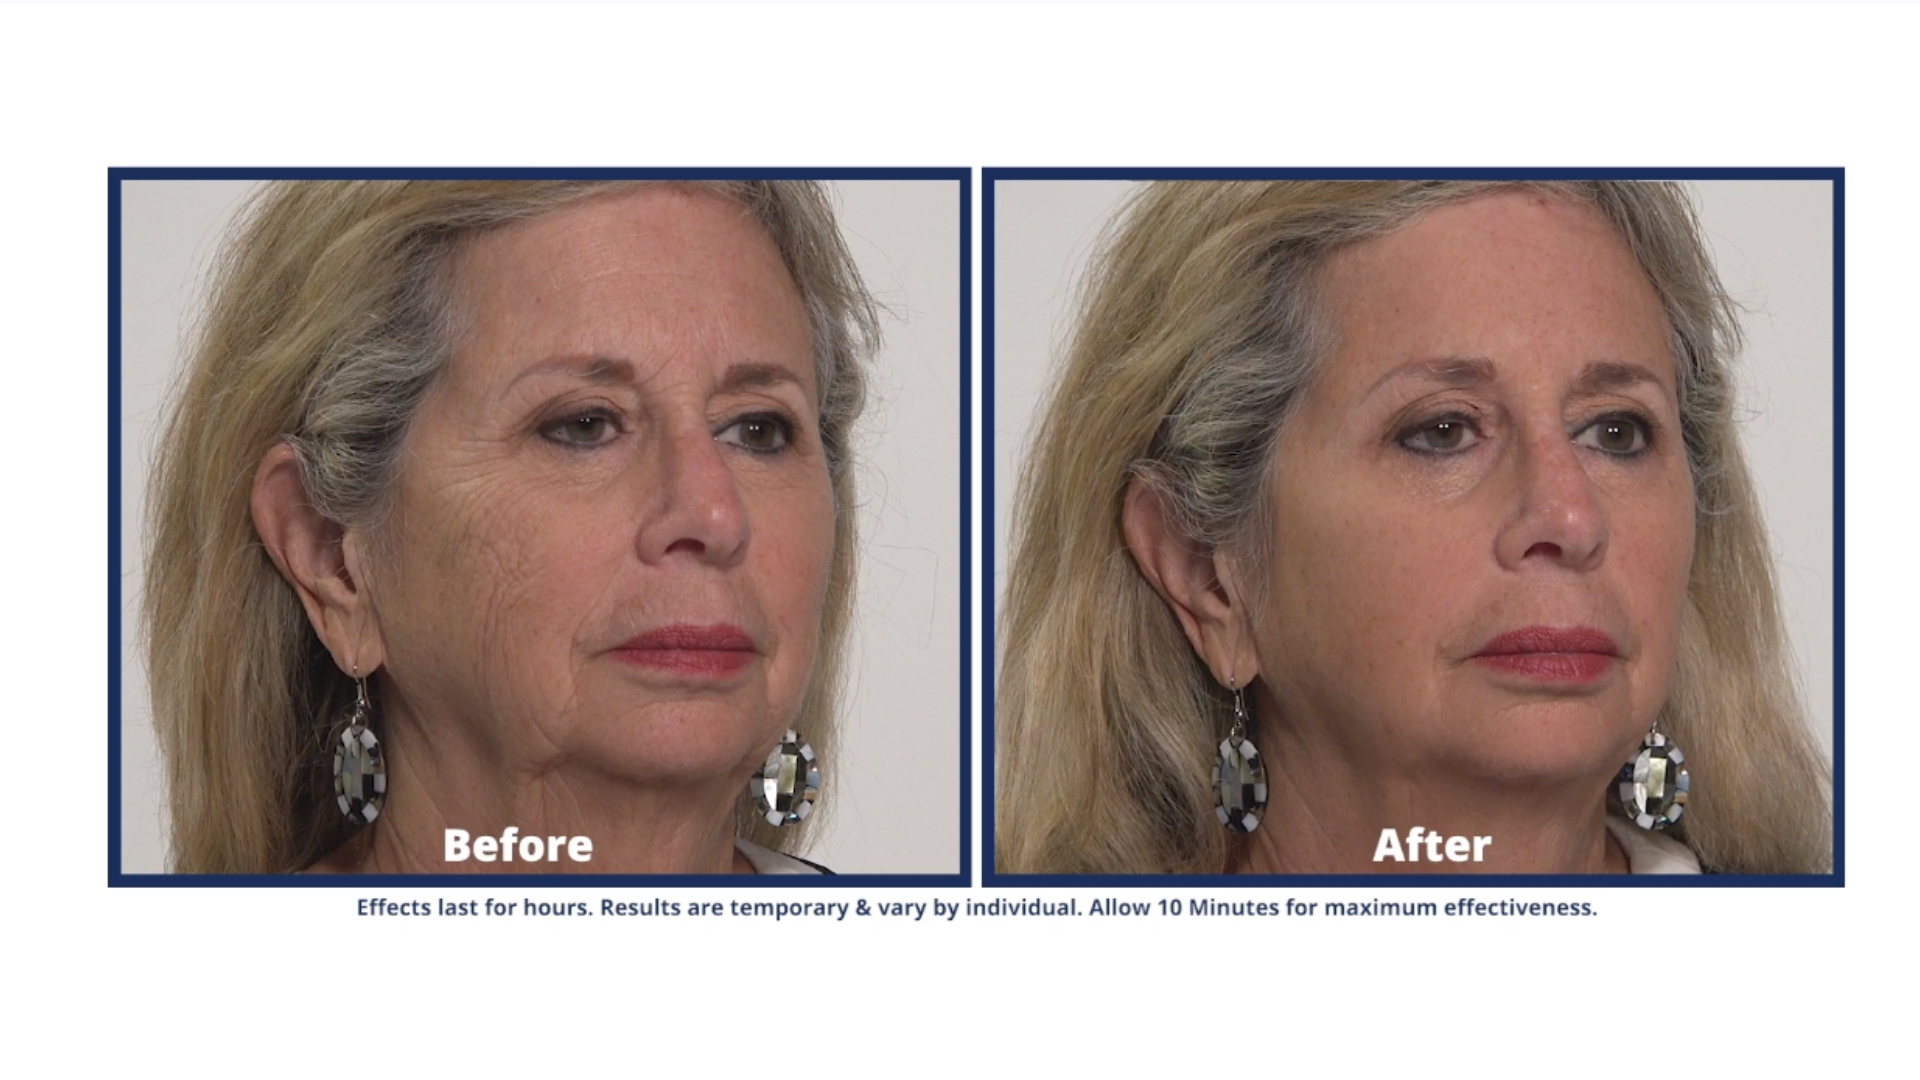 See how Plexaderm can help you look younger.